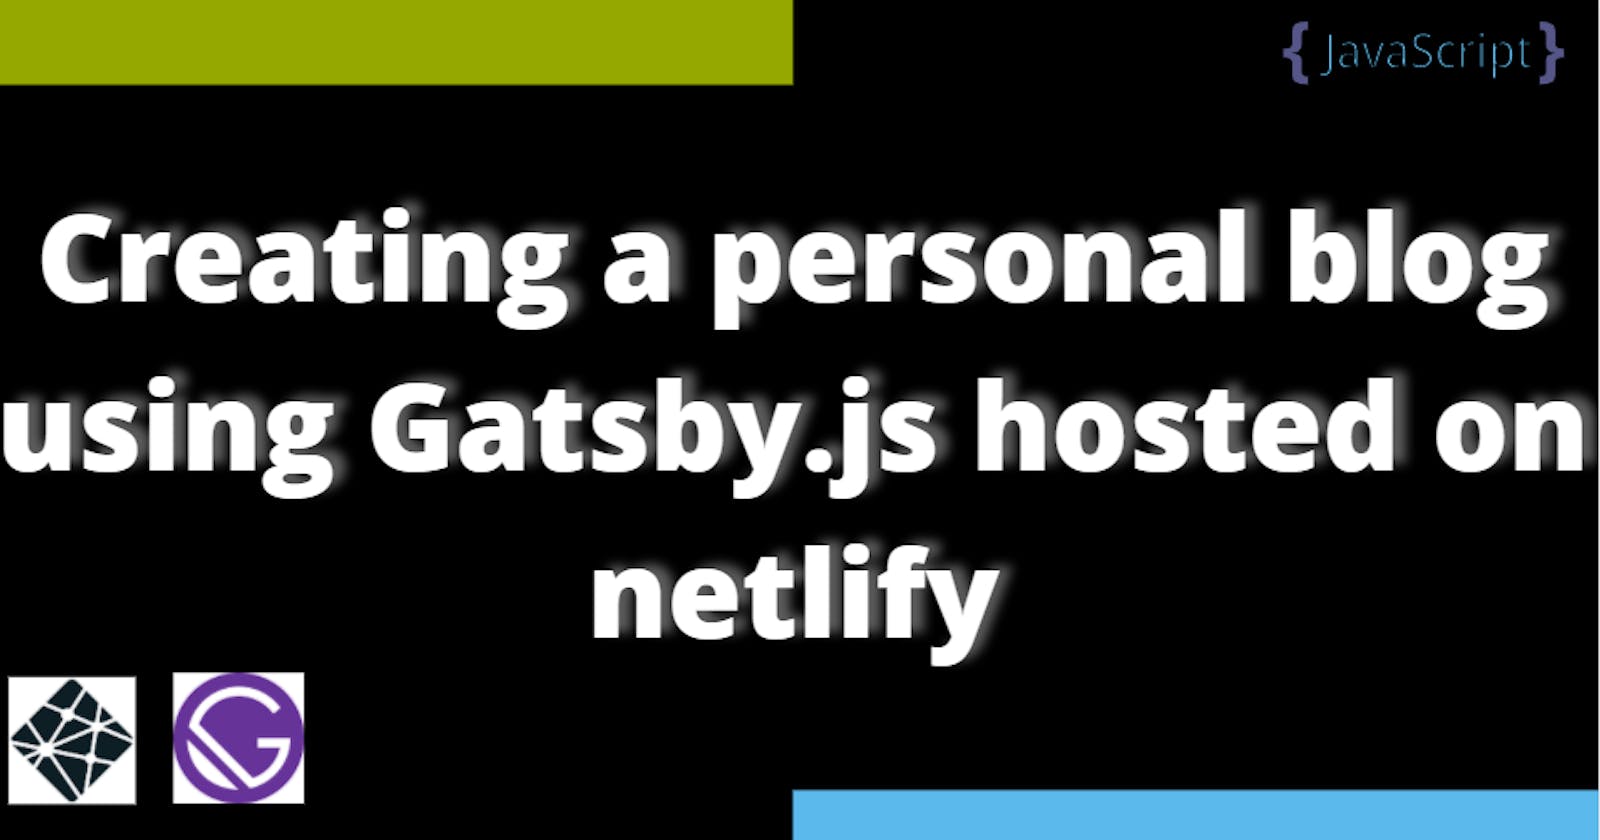 Start a personal blog at the end of 2020 using gatsby. I did it.